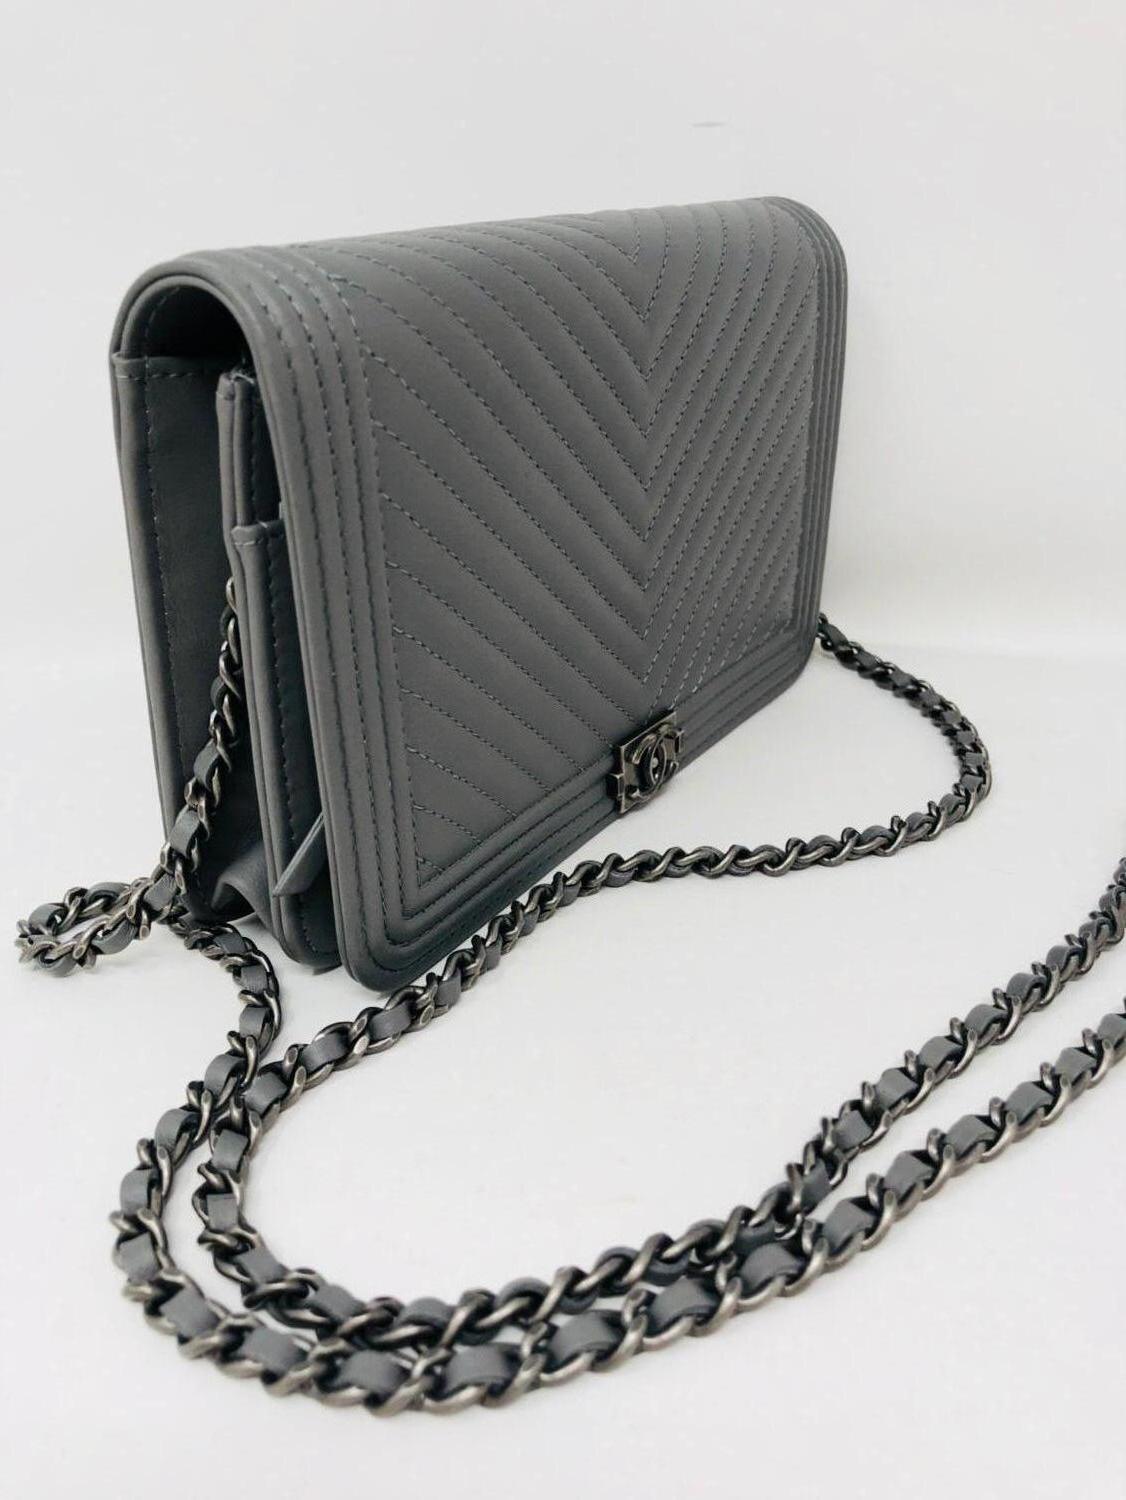 Chanel Boy Grey Wallet On A Chain with antique silver hardware. Can be worn as a wallet, clutch or crossbody bag. Brand new never worn. Comes with dust cover, authenticity card, and box. Guaranteed authentic. 